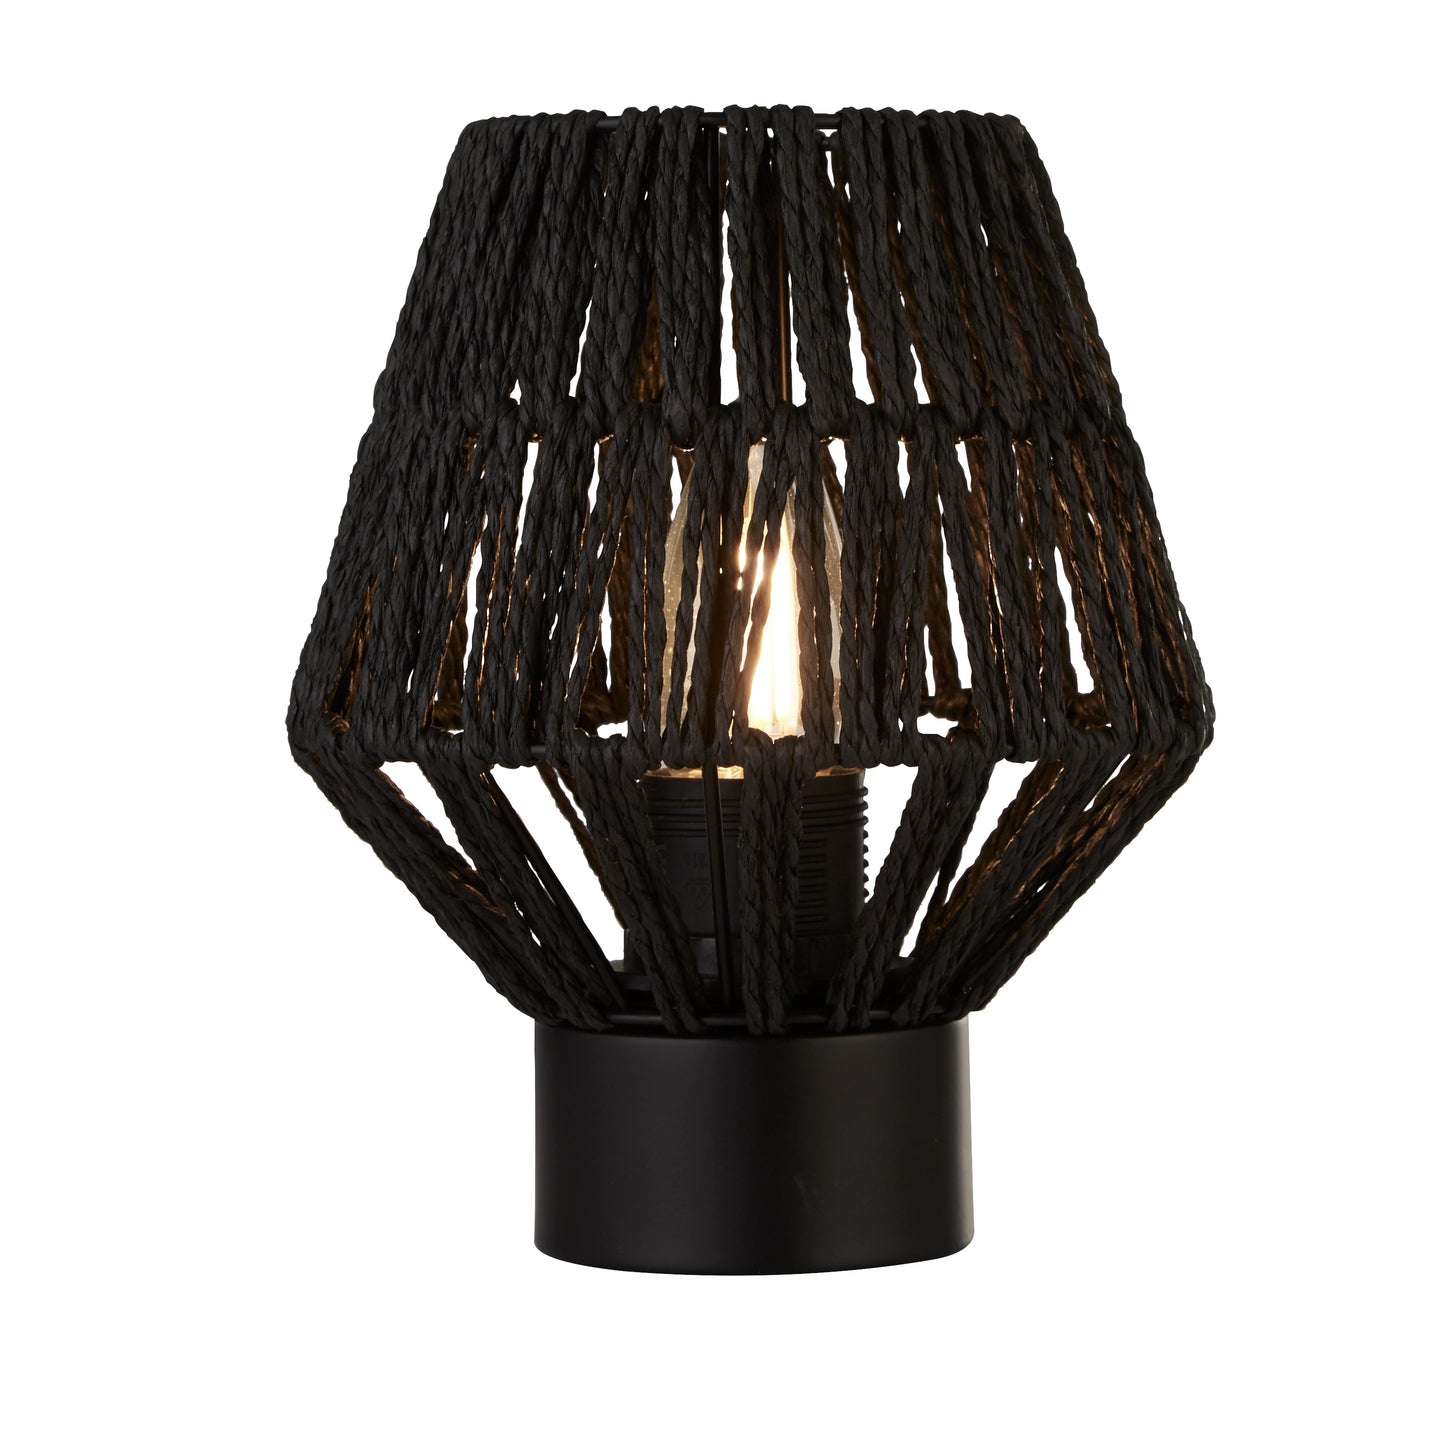 Our Woven table lamp is a beautifully geometric woven lamp and will be sure to add a natural and scandic vibe to any room within your home. Complimented with a black base this lamp will certainly enhance any modern décor.  